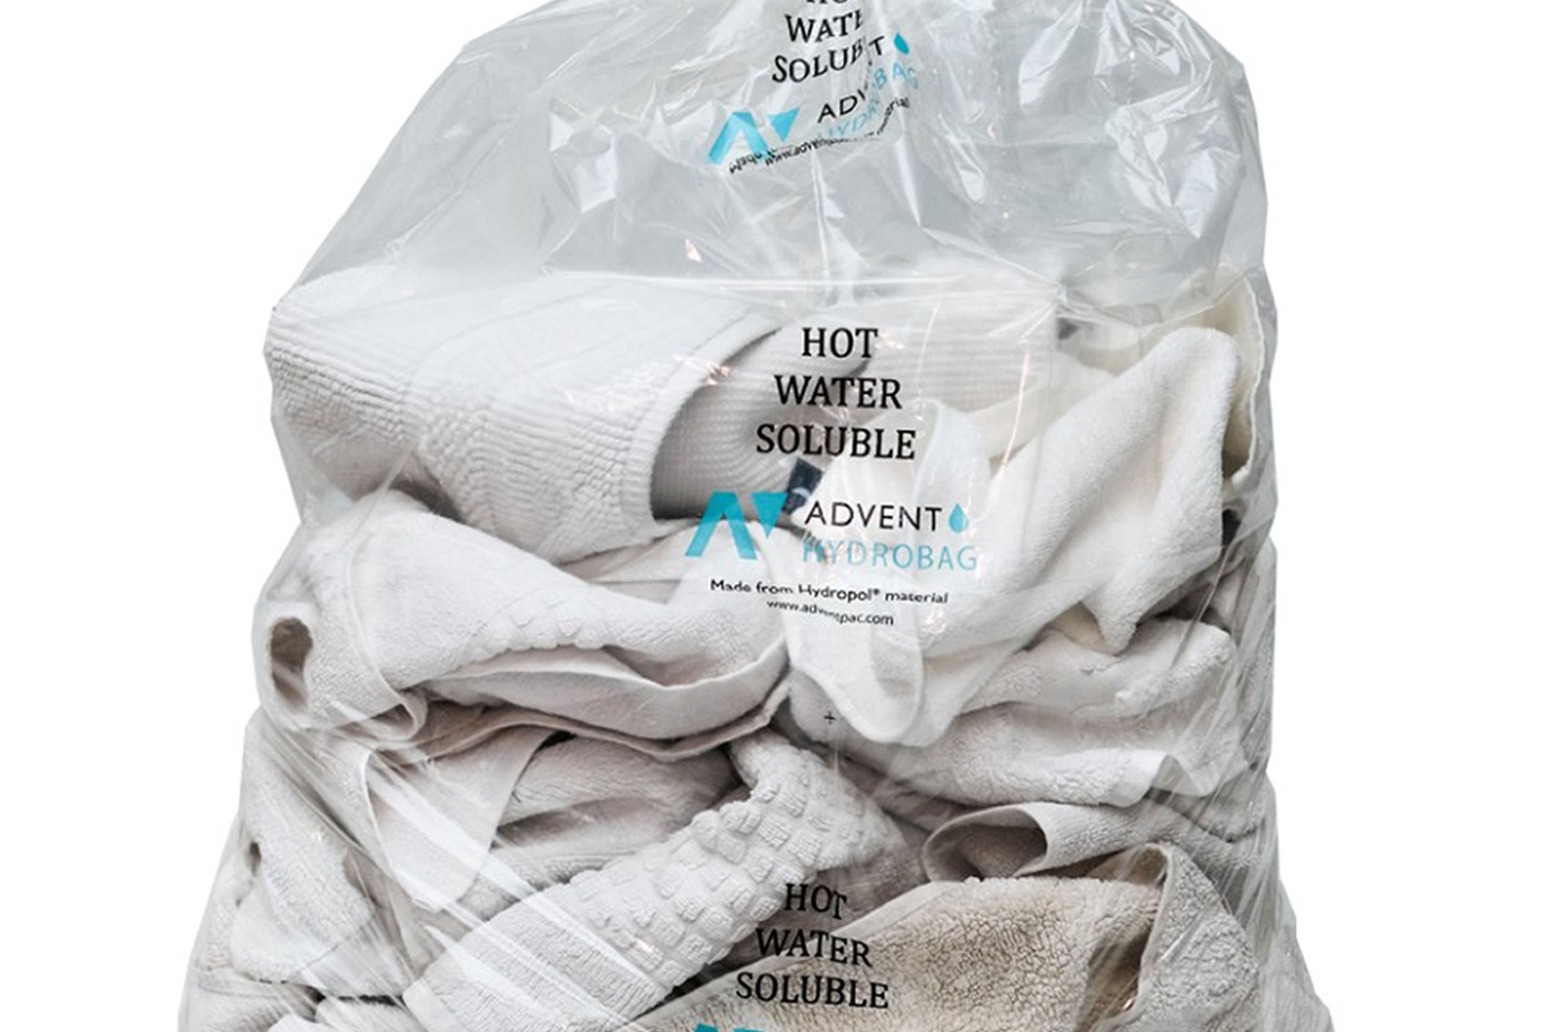 Polymer packaging firm donates dissolvable laundry bags to font-line NHS staff 